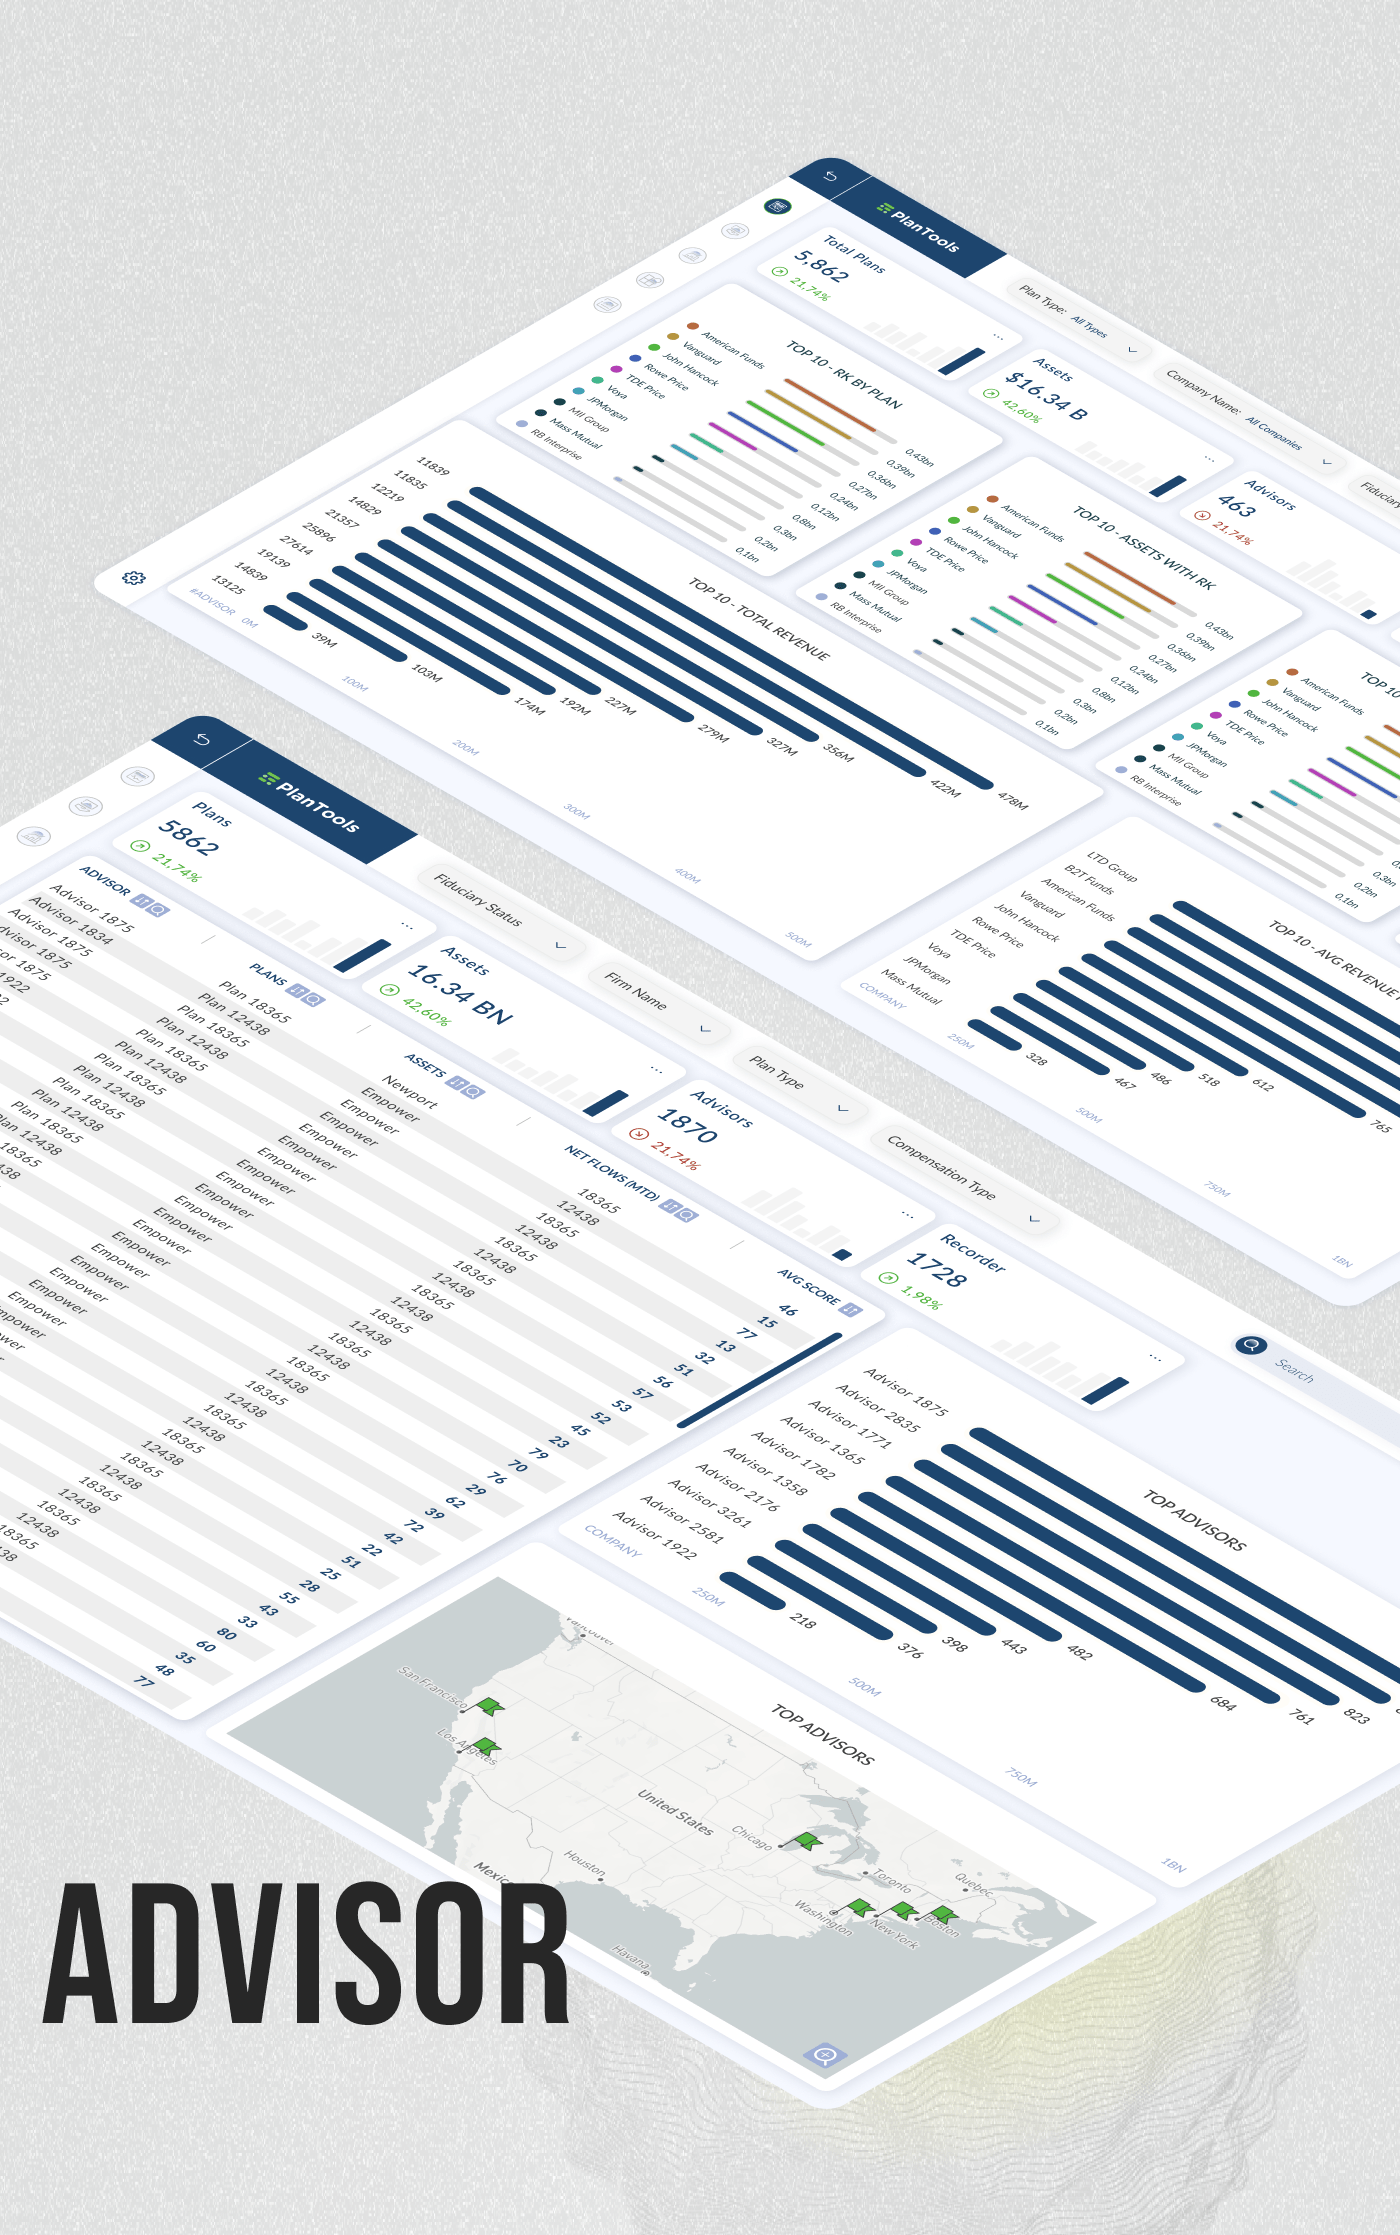 Dashboard panel for an investment company